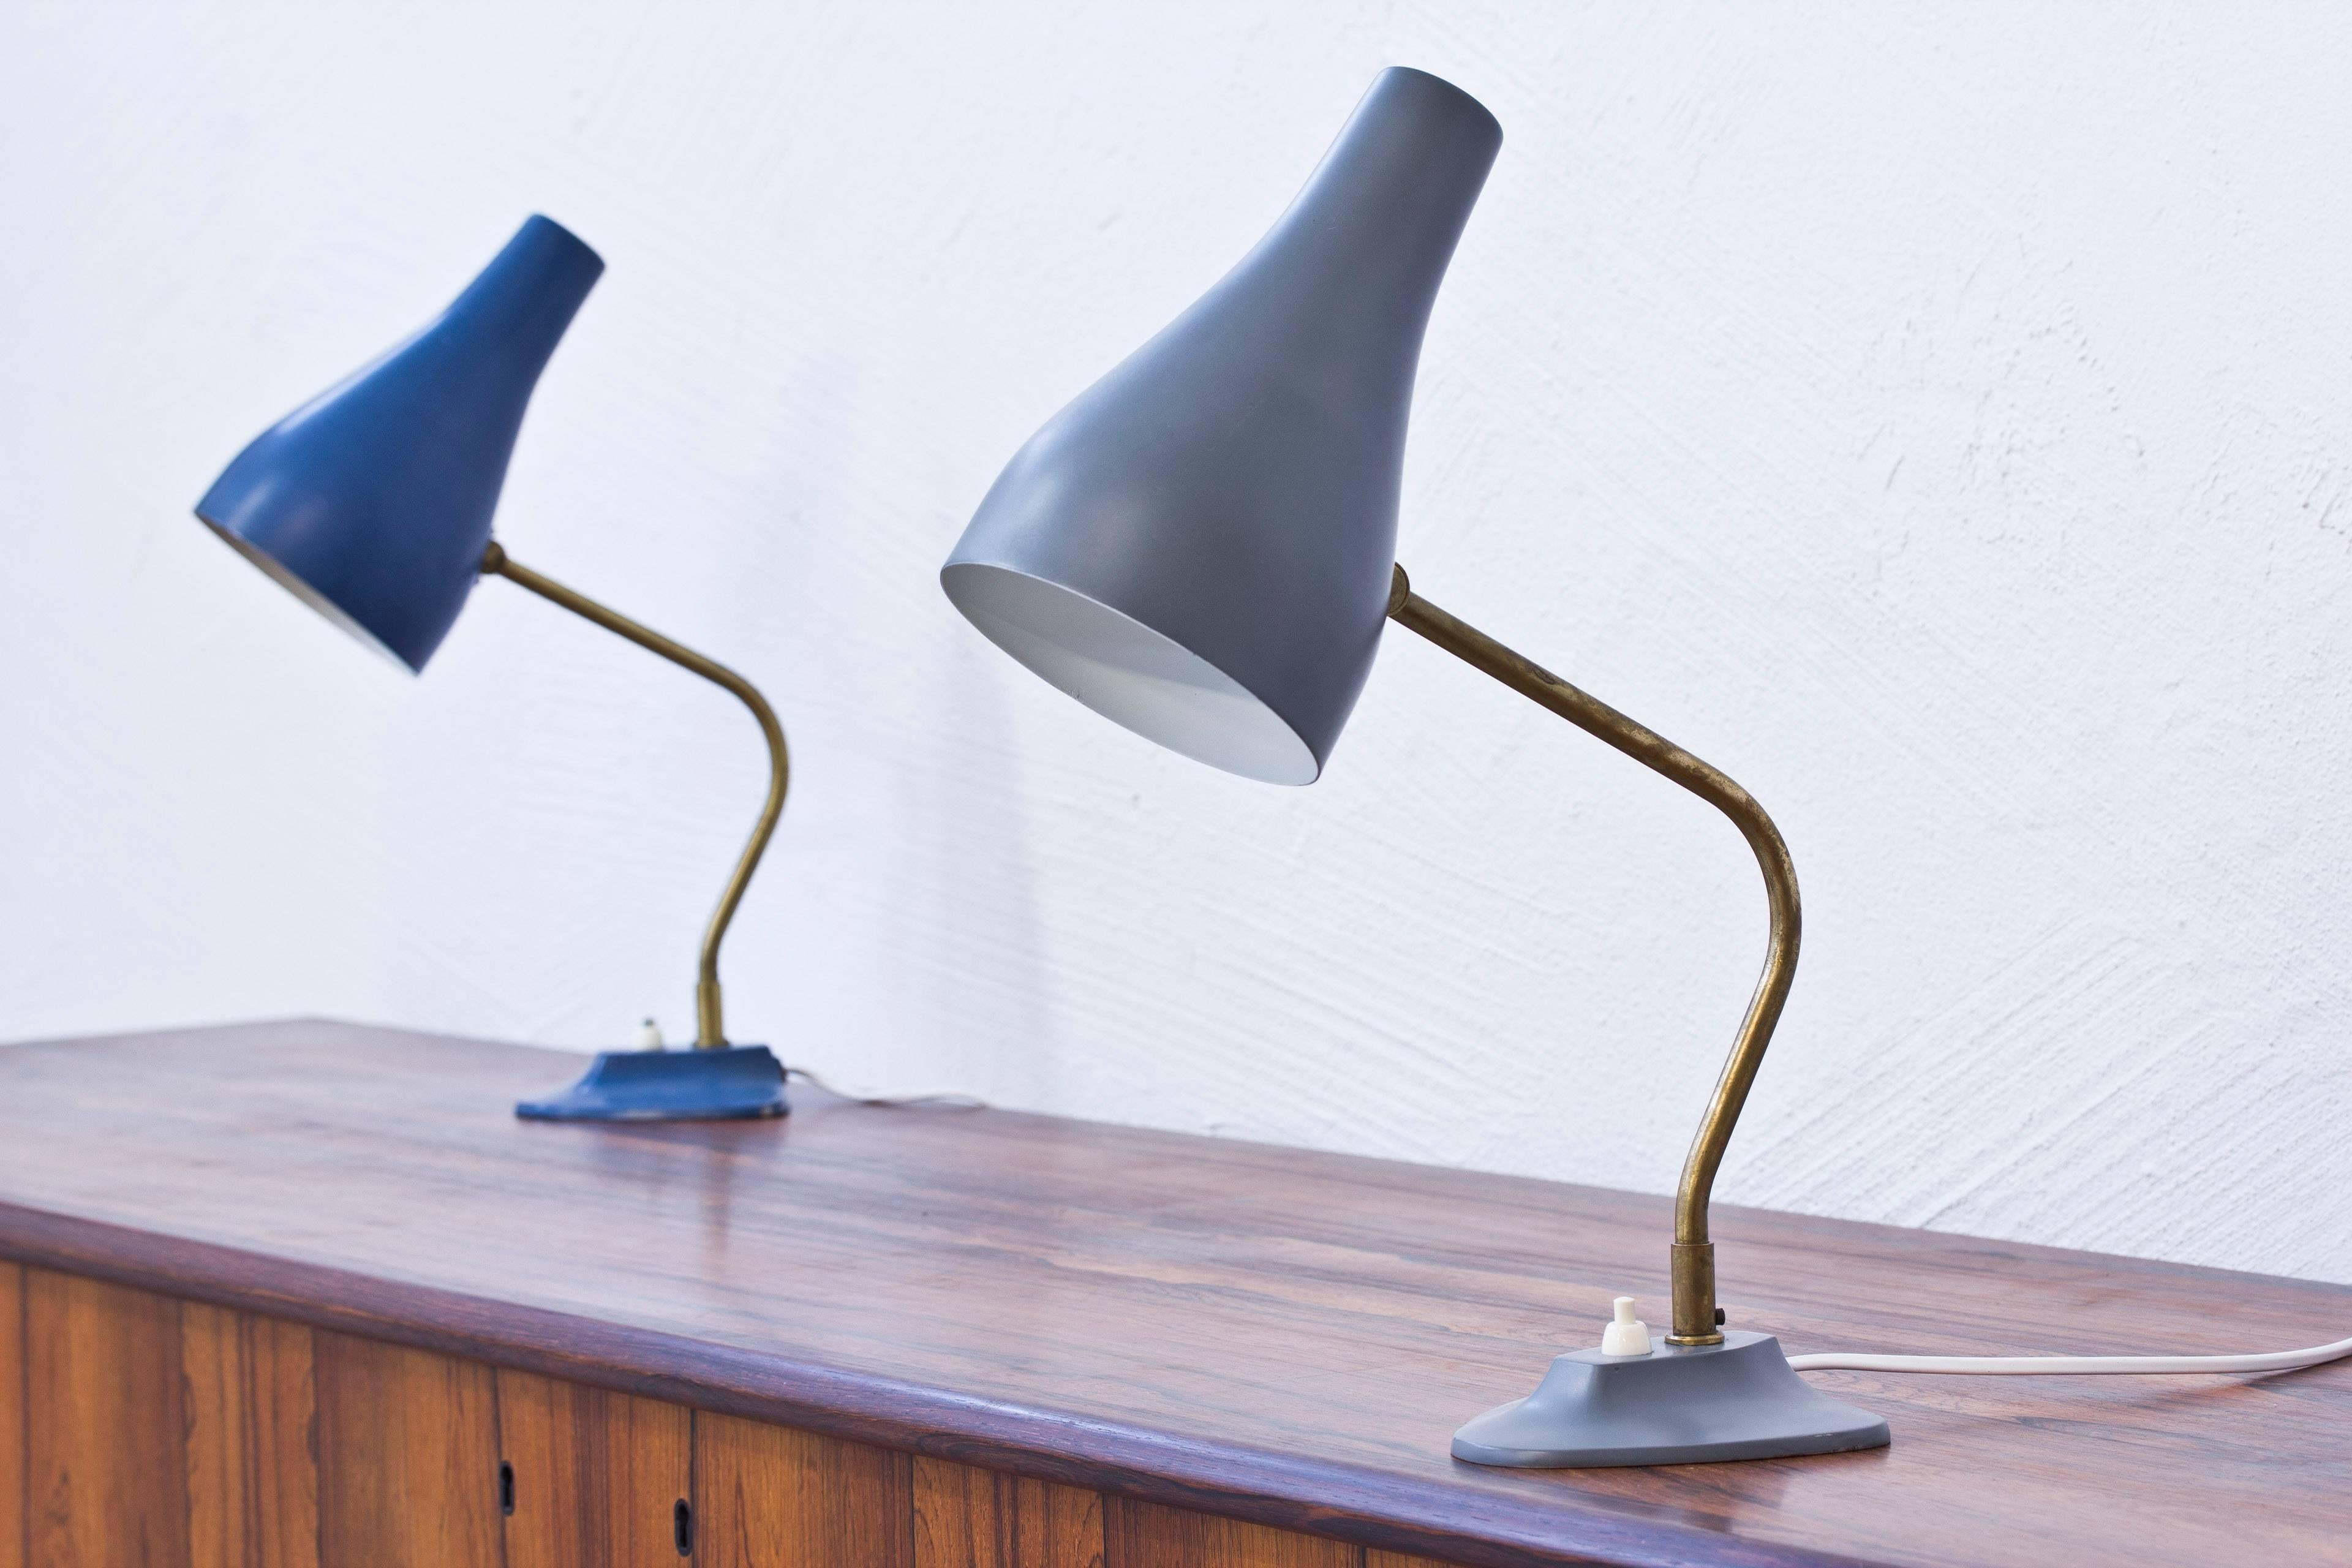 Table lamps produced in Sweden by ASEA. Brass stems with base and shade in painted metal. Adjustable shade and lamp rotating on an axis from the base. Light switch on the base in working order. Very good condition with age related wear and patina.